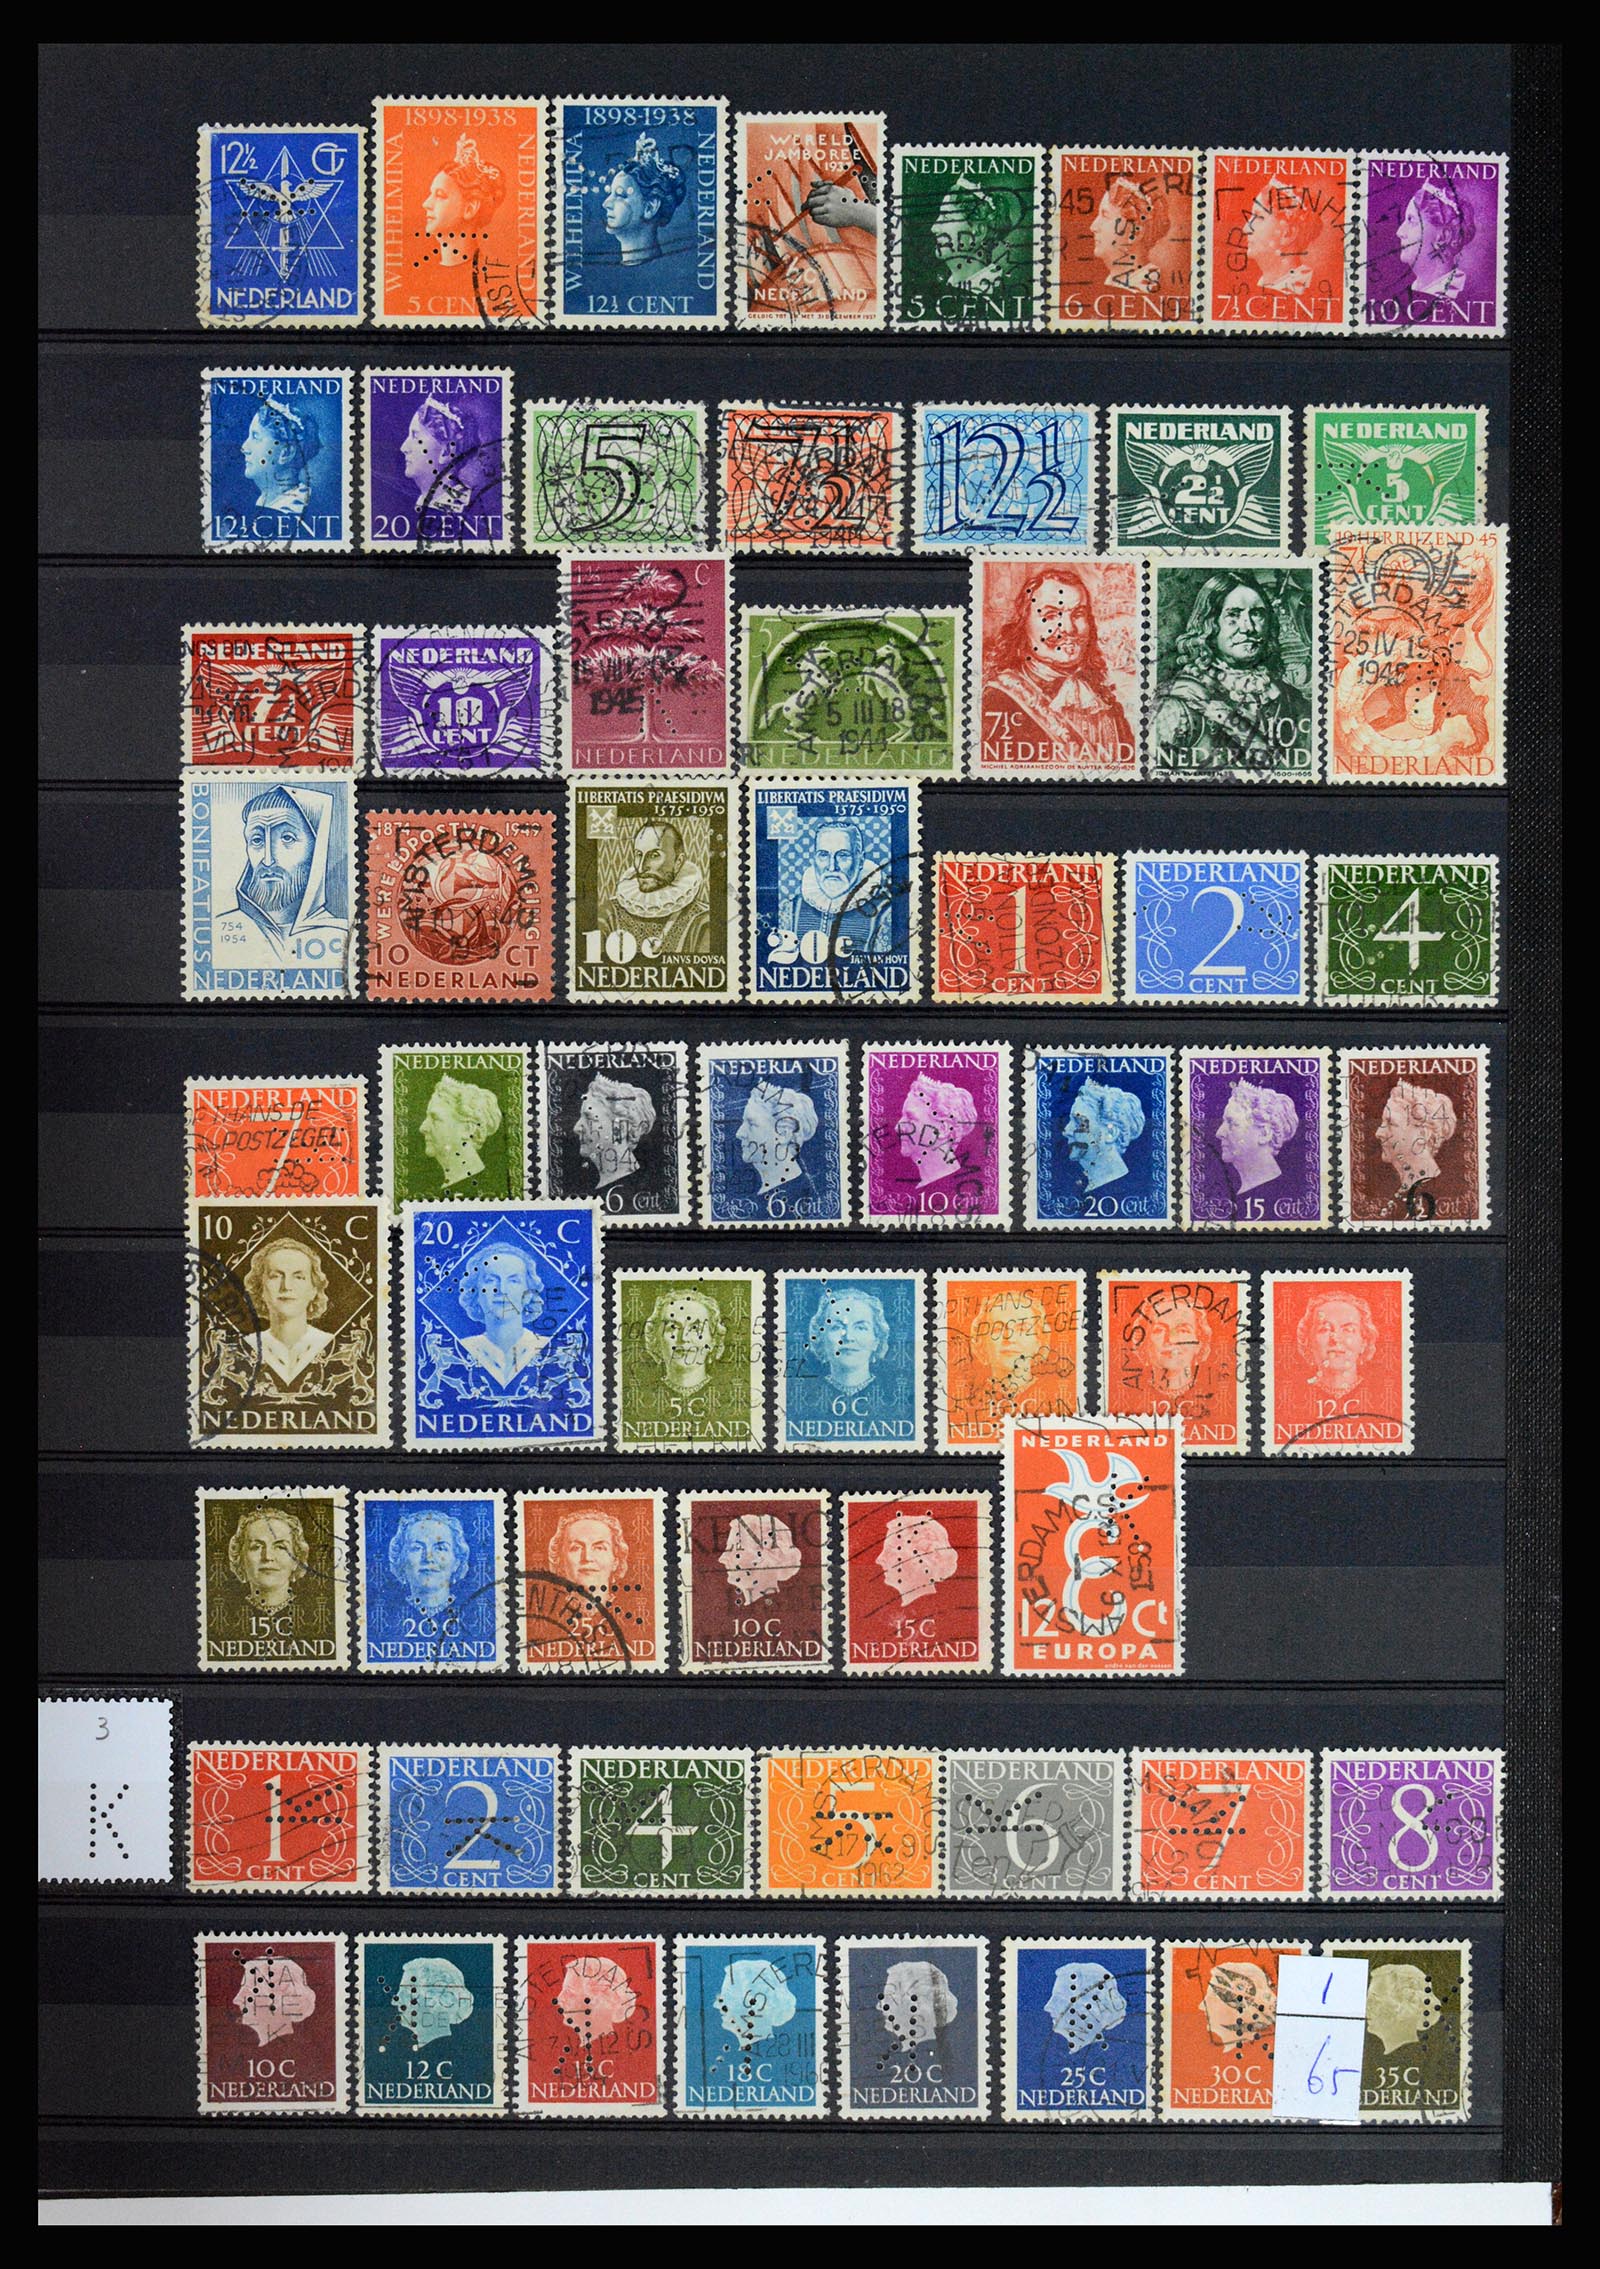 37183 025 - Stamp collection 37183 Netherlands perfins 1872-1960.